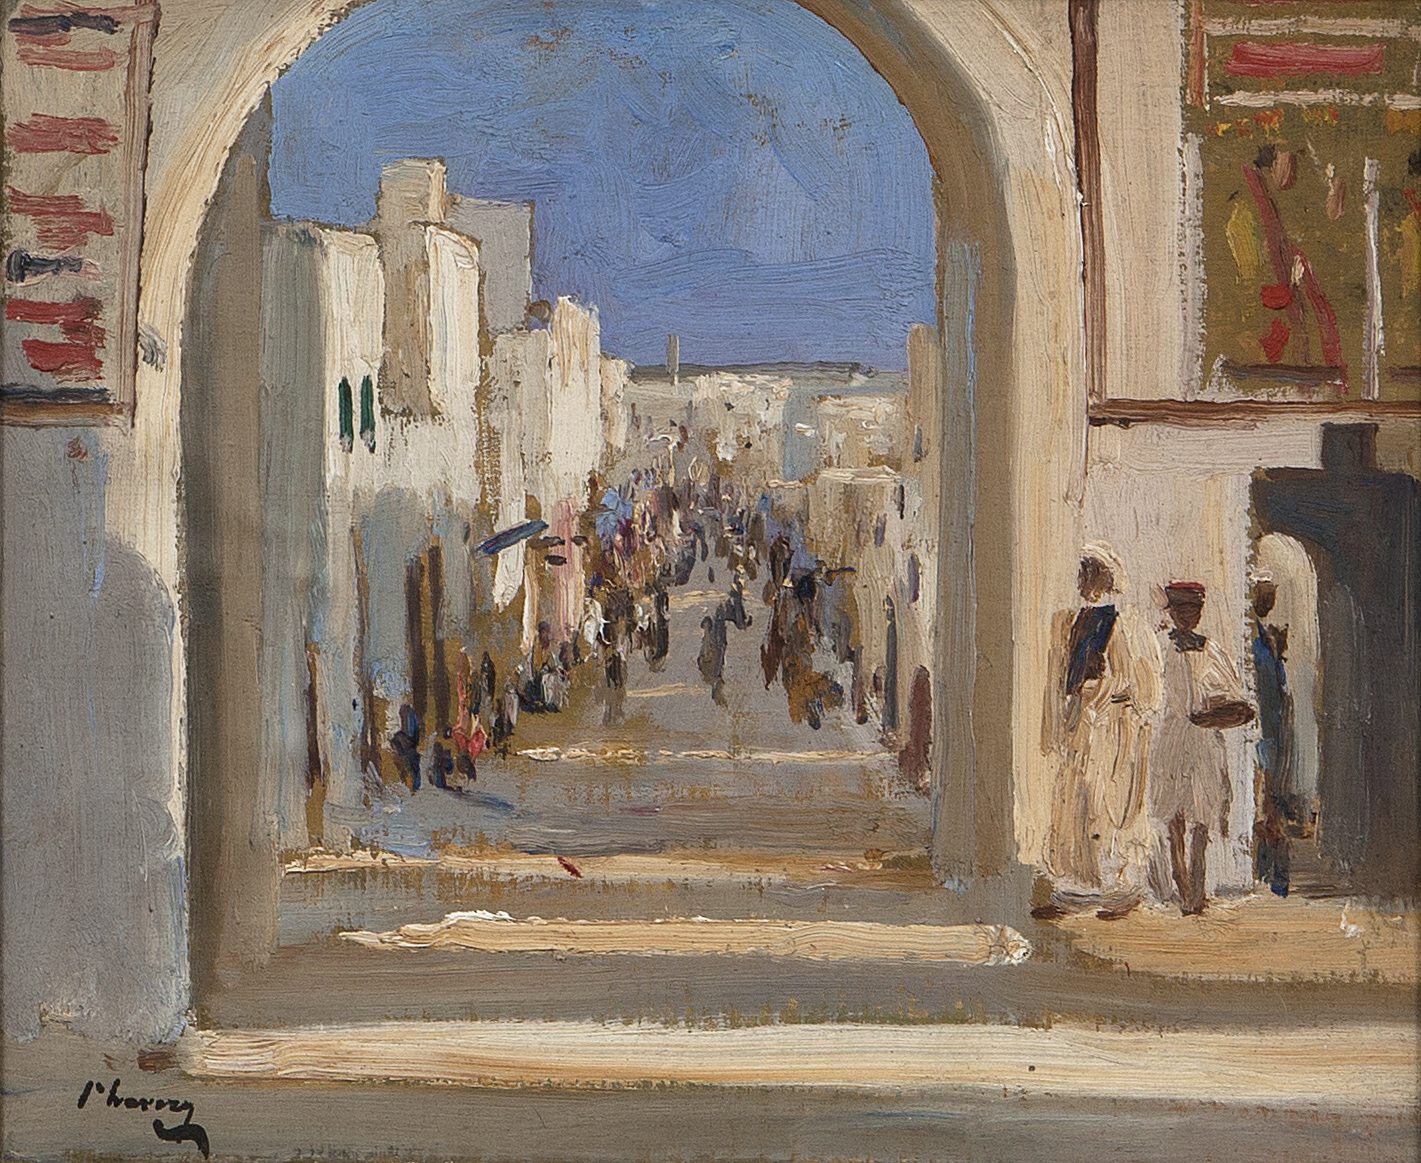 A Street in Rabat, Morocco